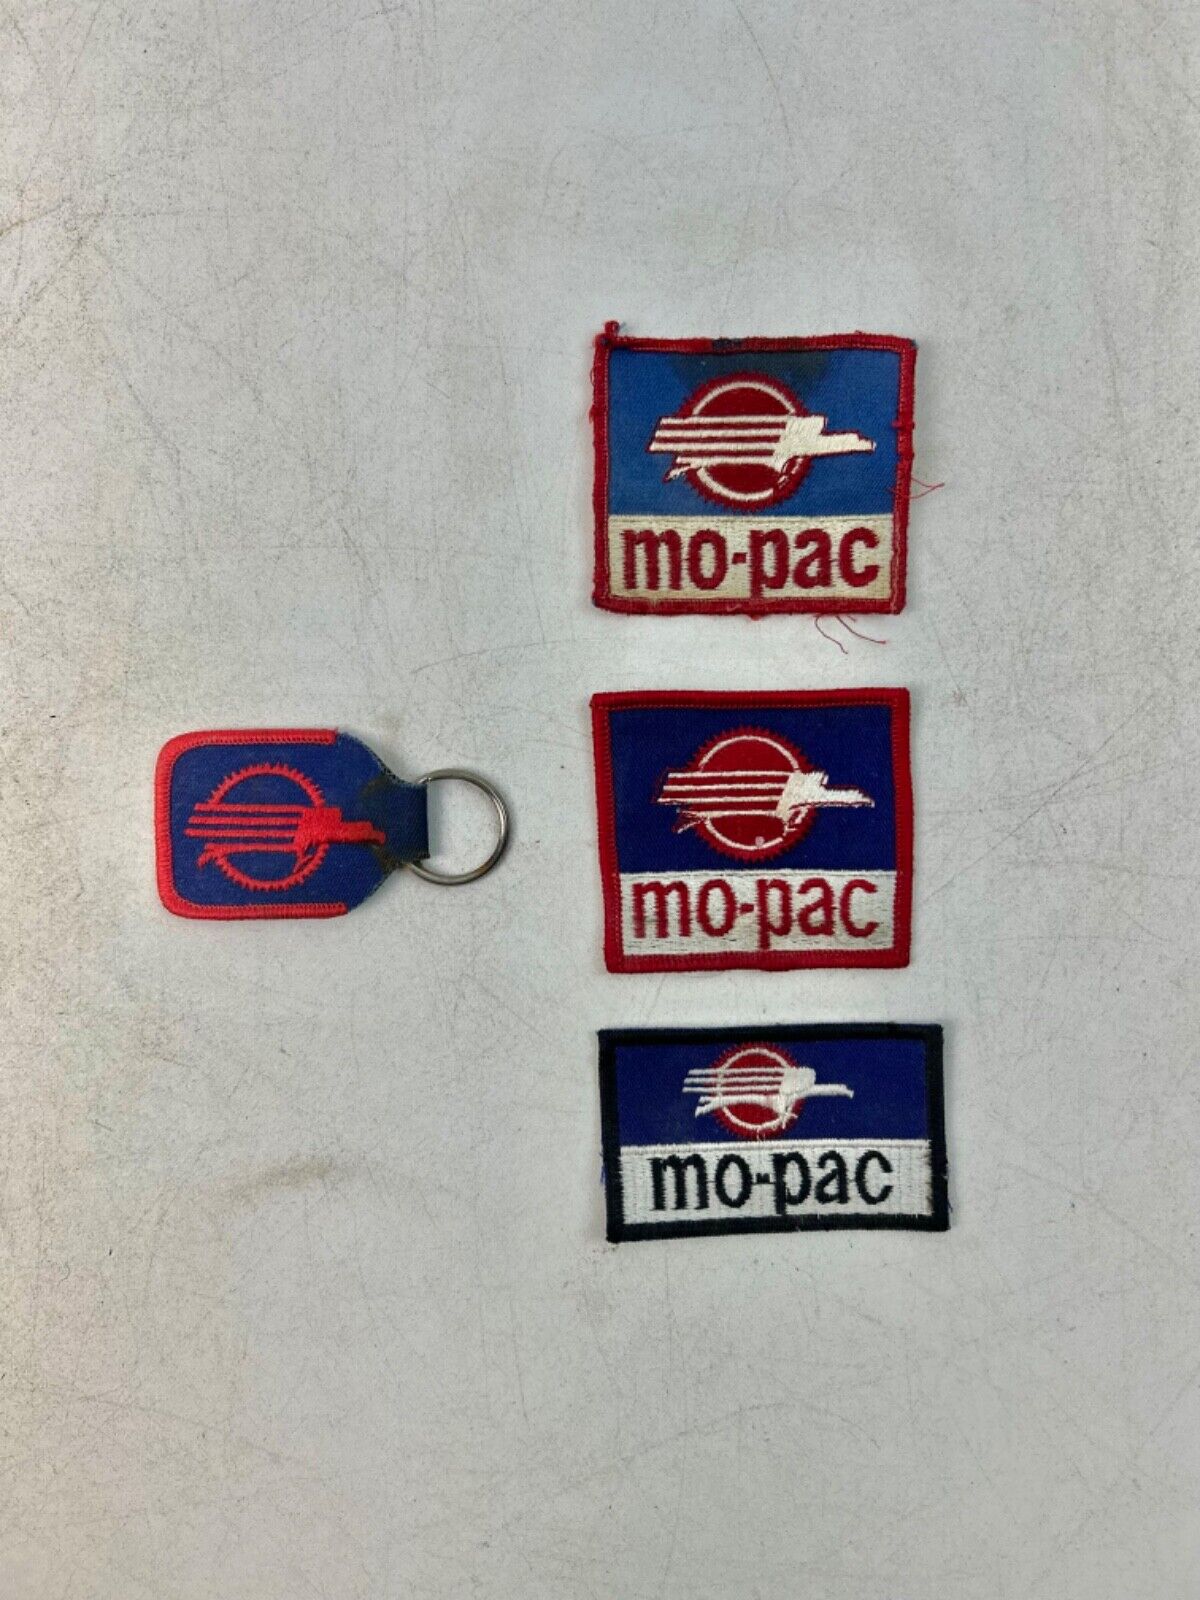 Vintage Set Of 3 Missouri Pacific (Mo-Pac) Patches & 1 Key Chain